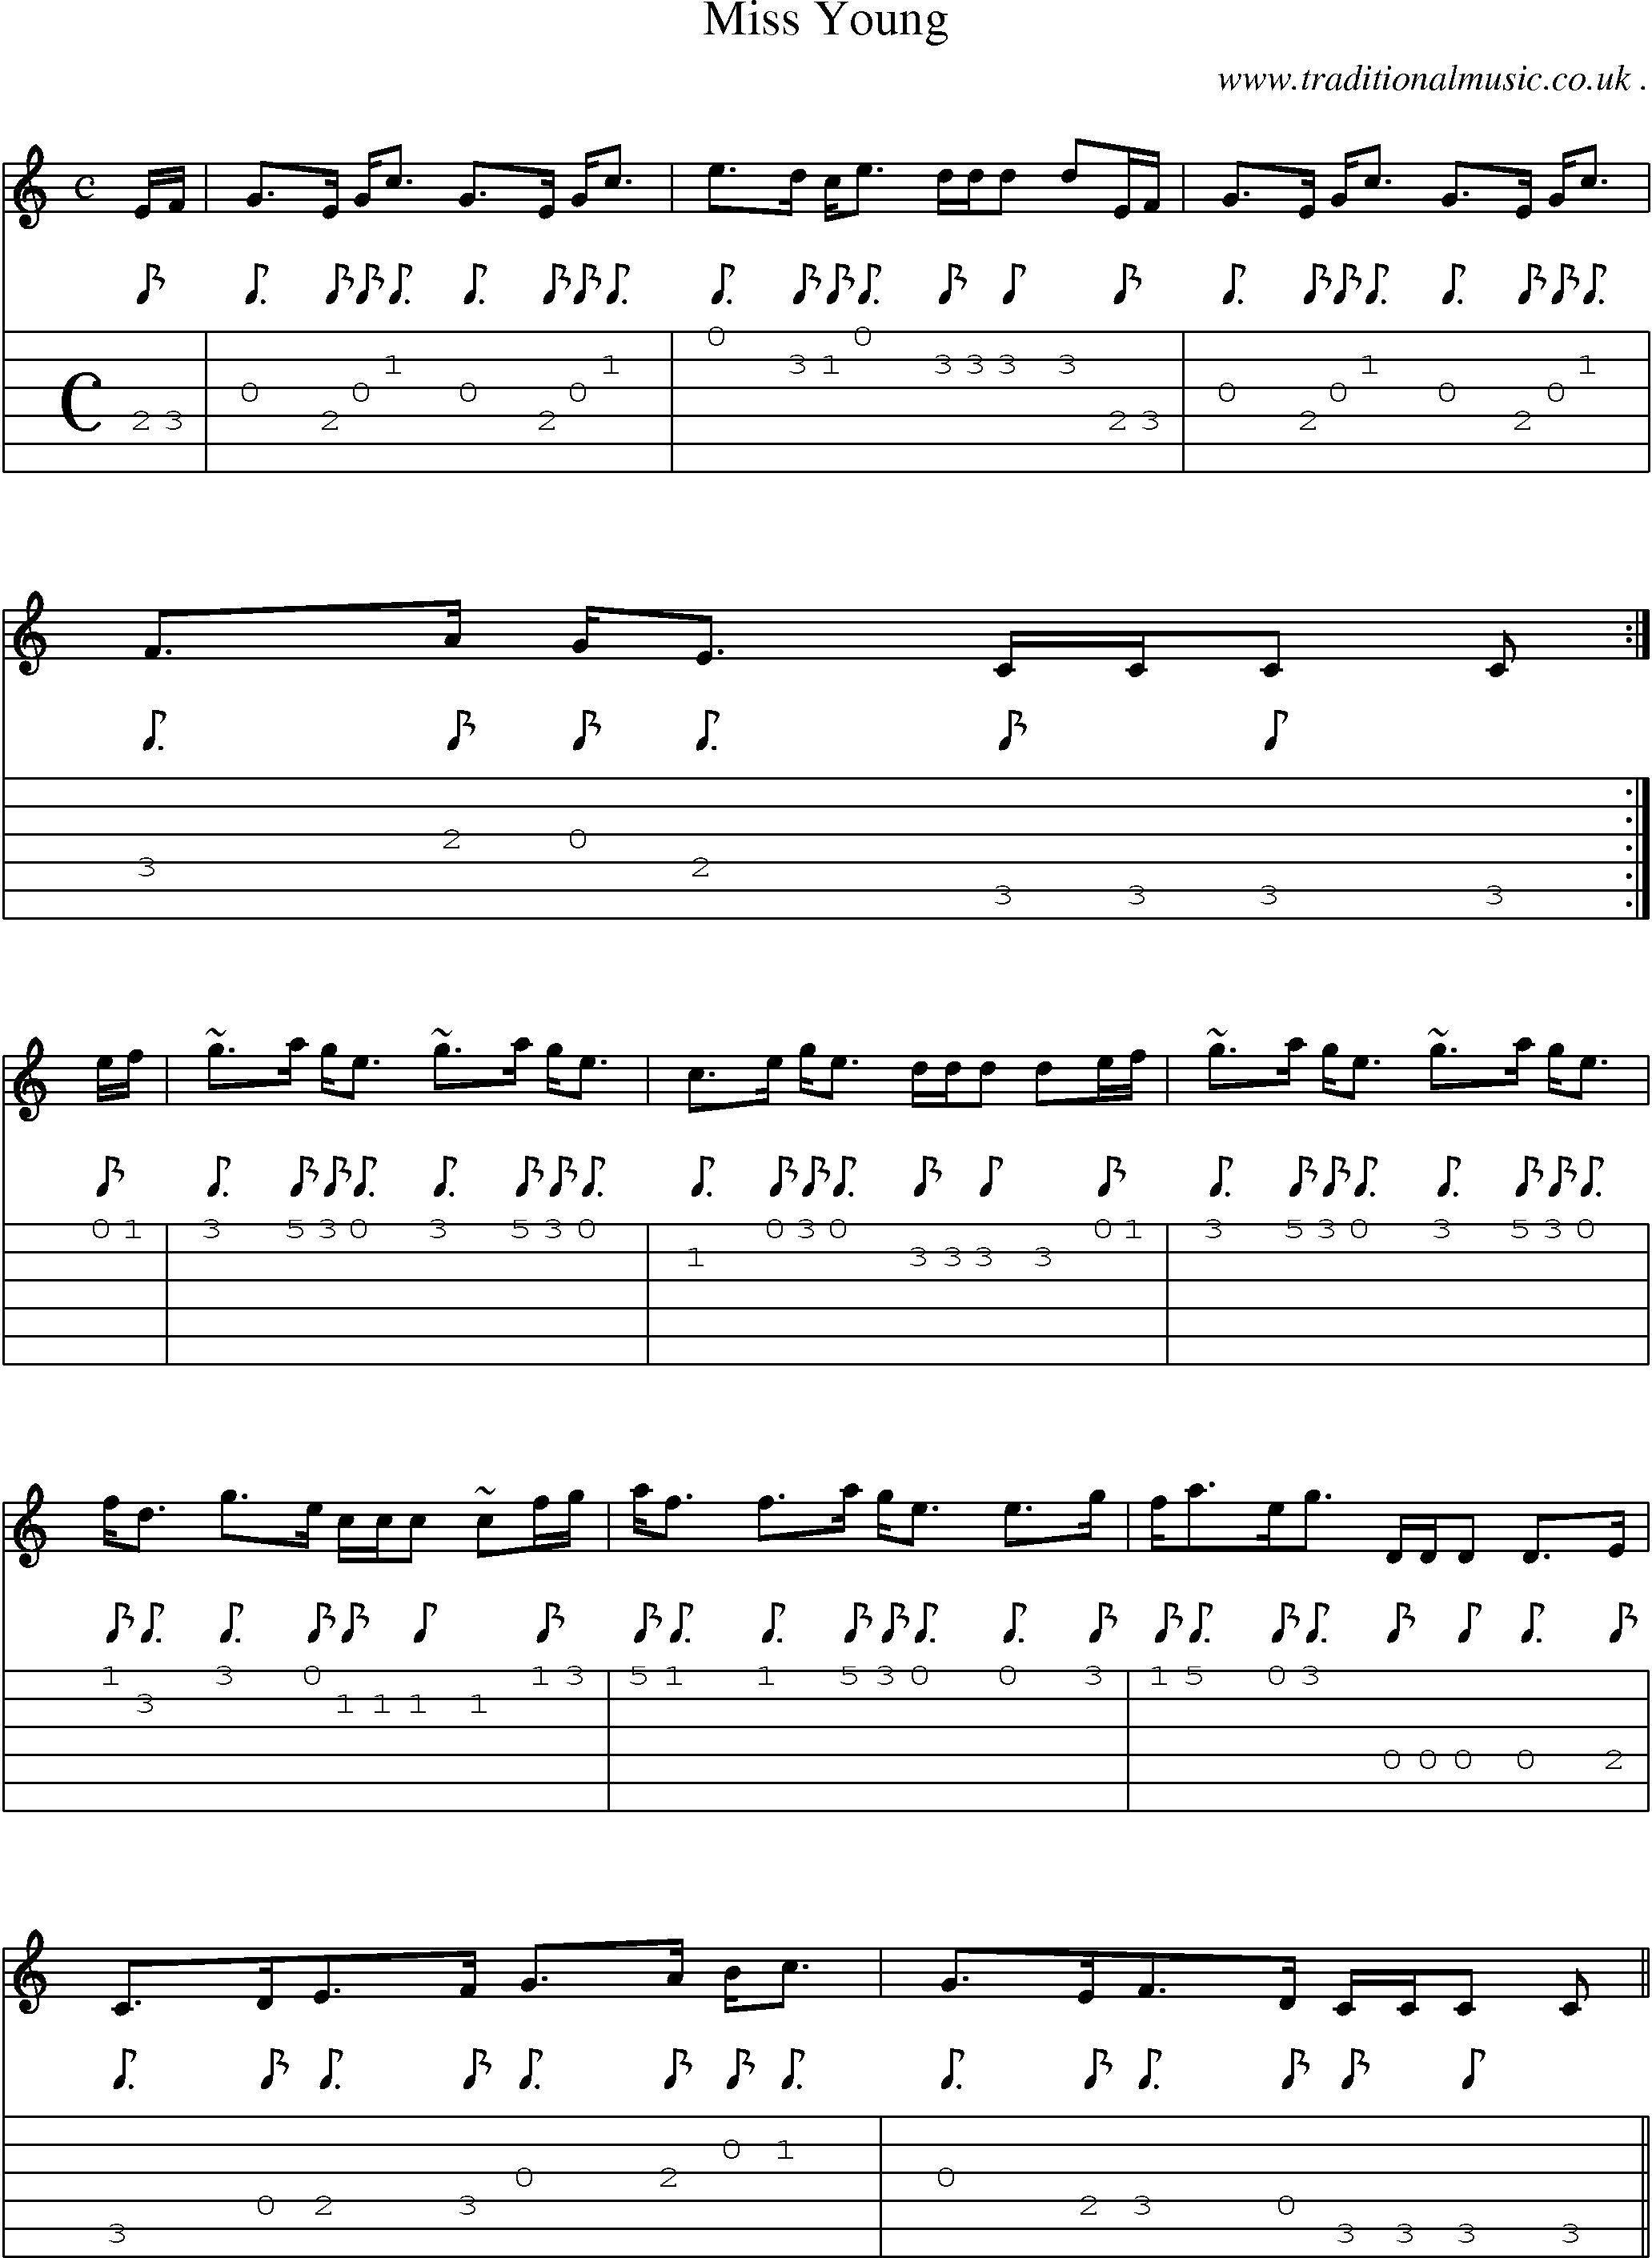 Sheet-music  score, Chords and Guitar Tabs for Miss Young